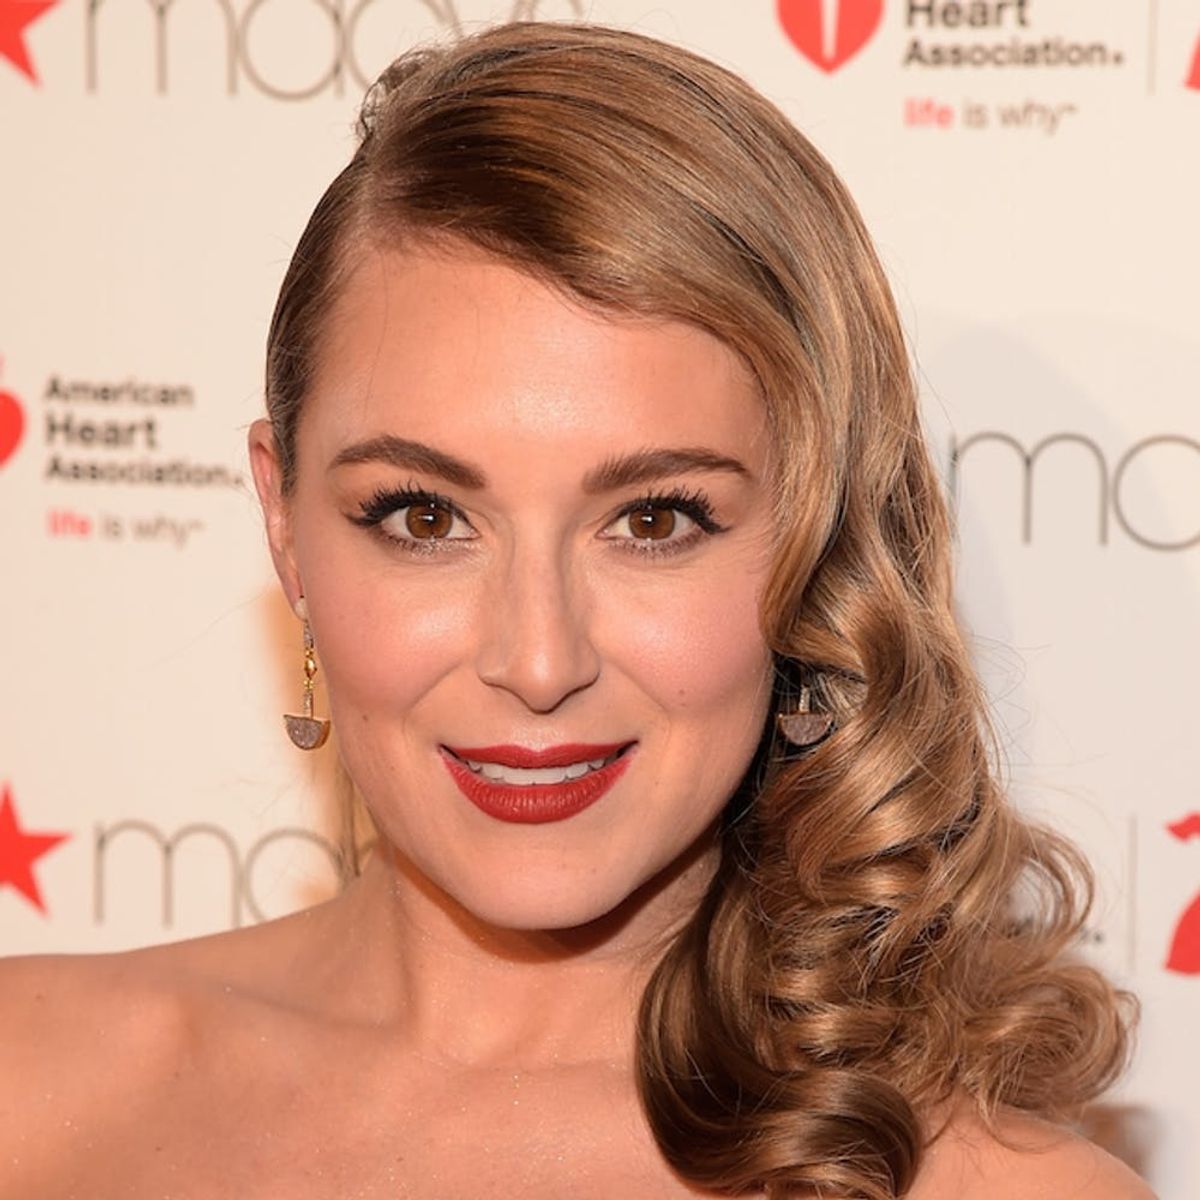 Spy Kids’ Alexa PenaVega Just Debuted Her Baby Bump in the Most Gorgeous Way Possible